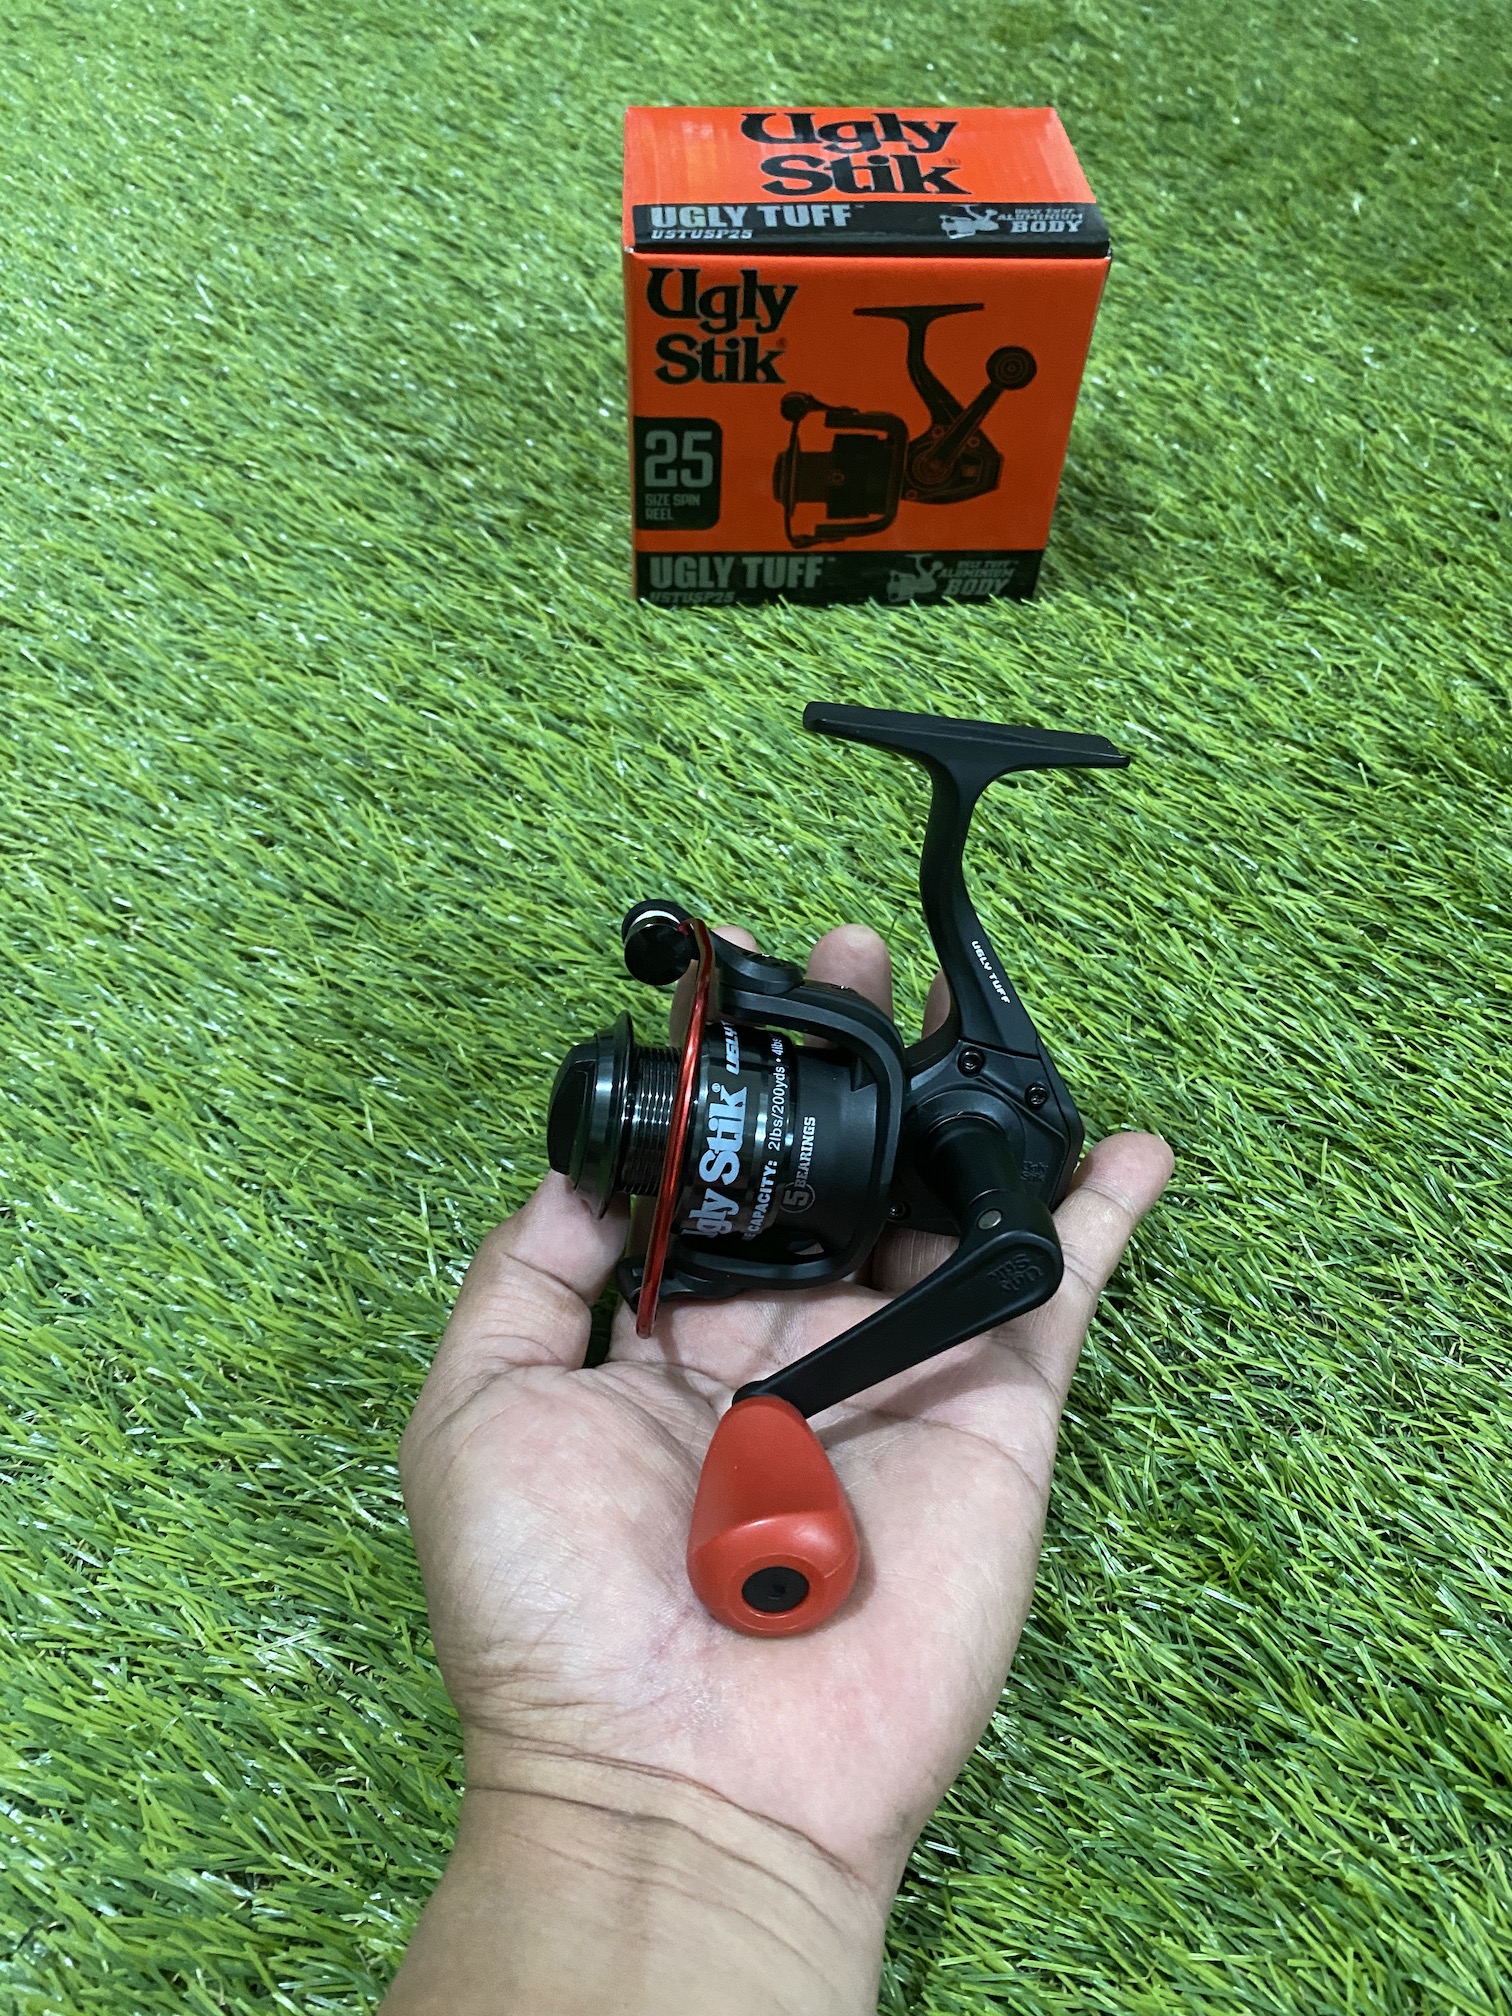 SHAKESPEARE UGLY STIK UGLY TUFF SPINNING REELS BY SHAKESPEARE